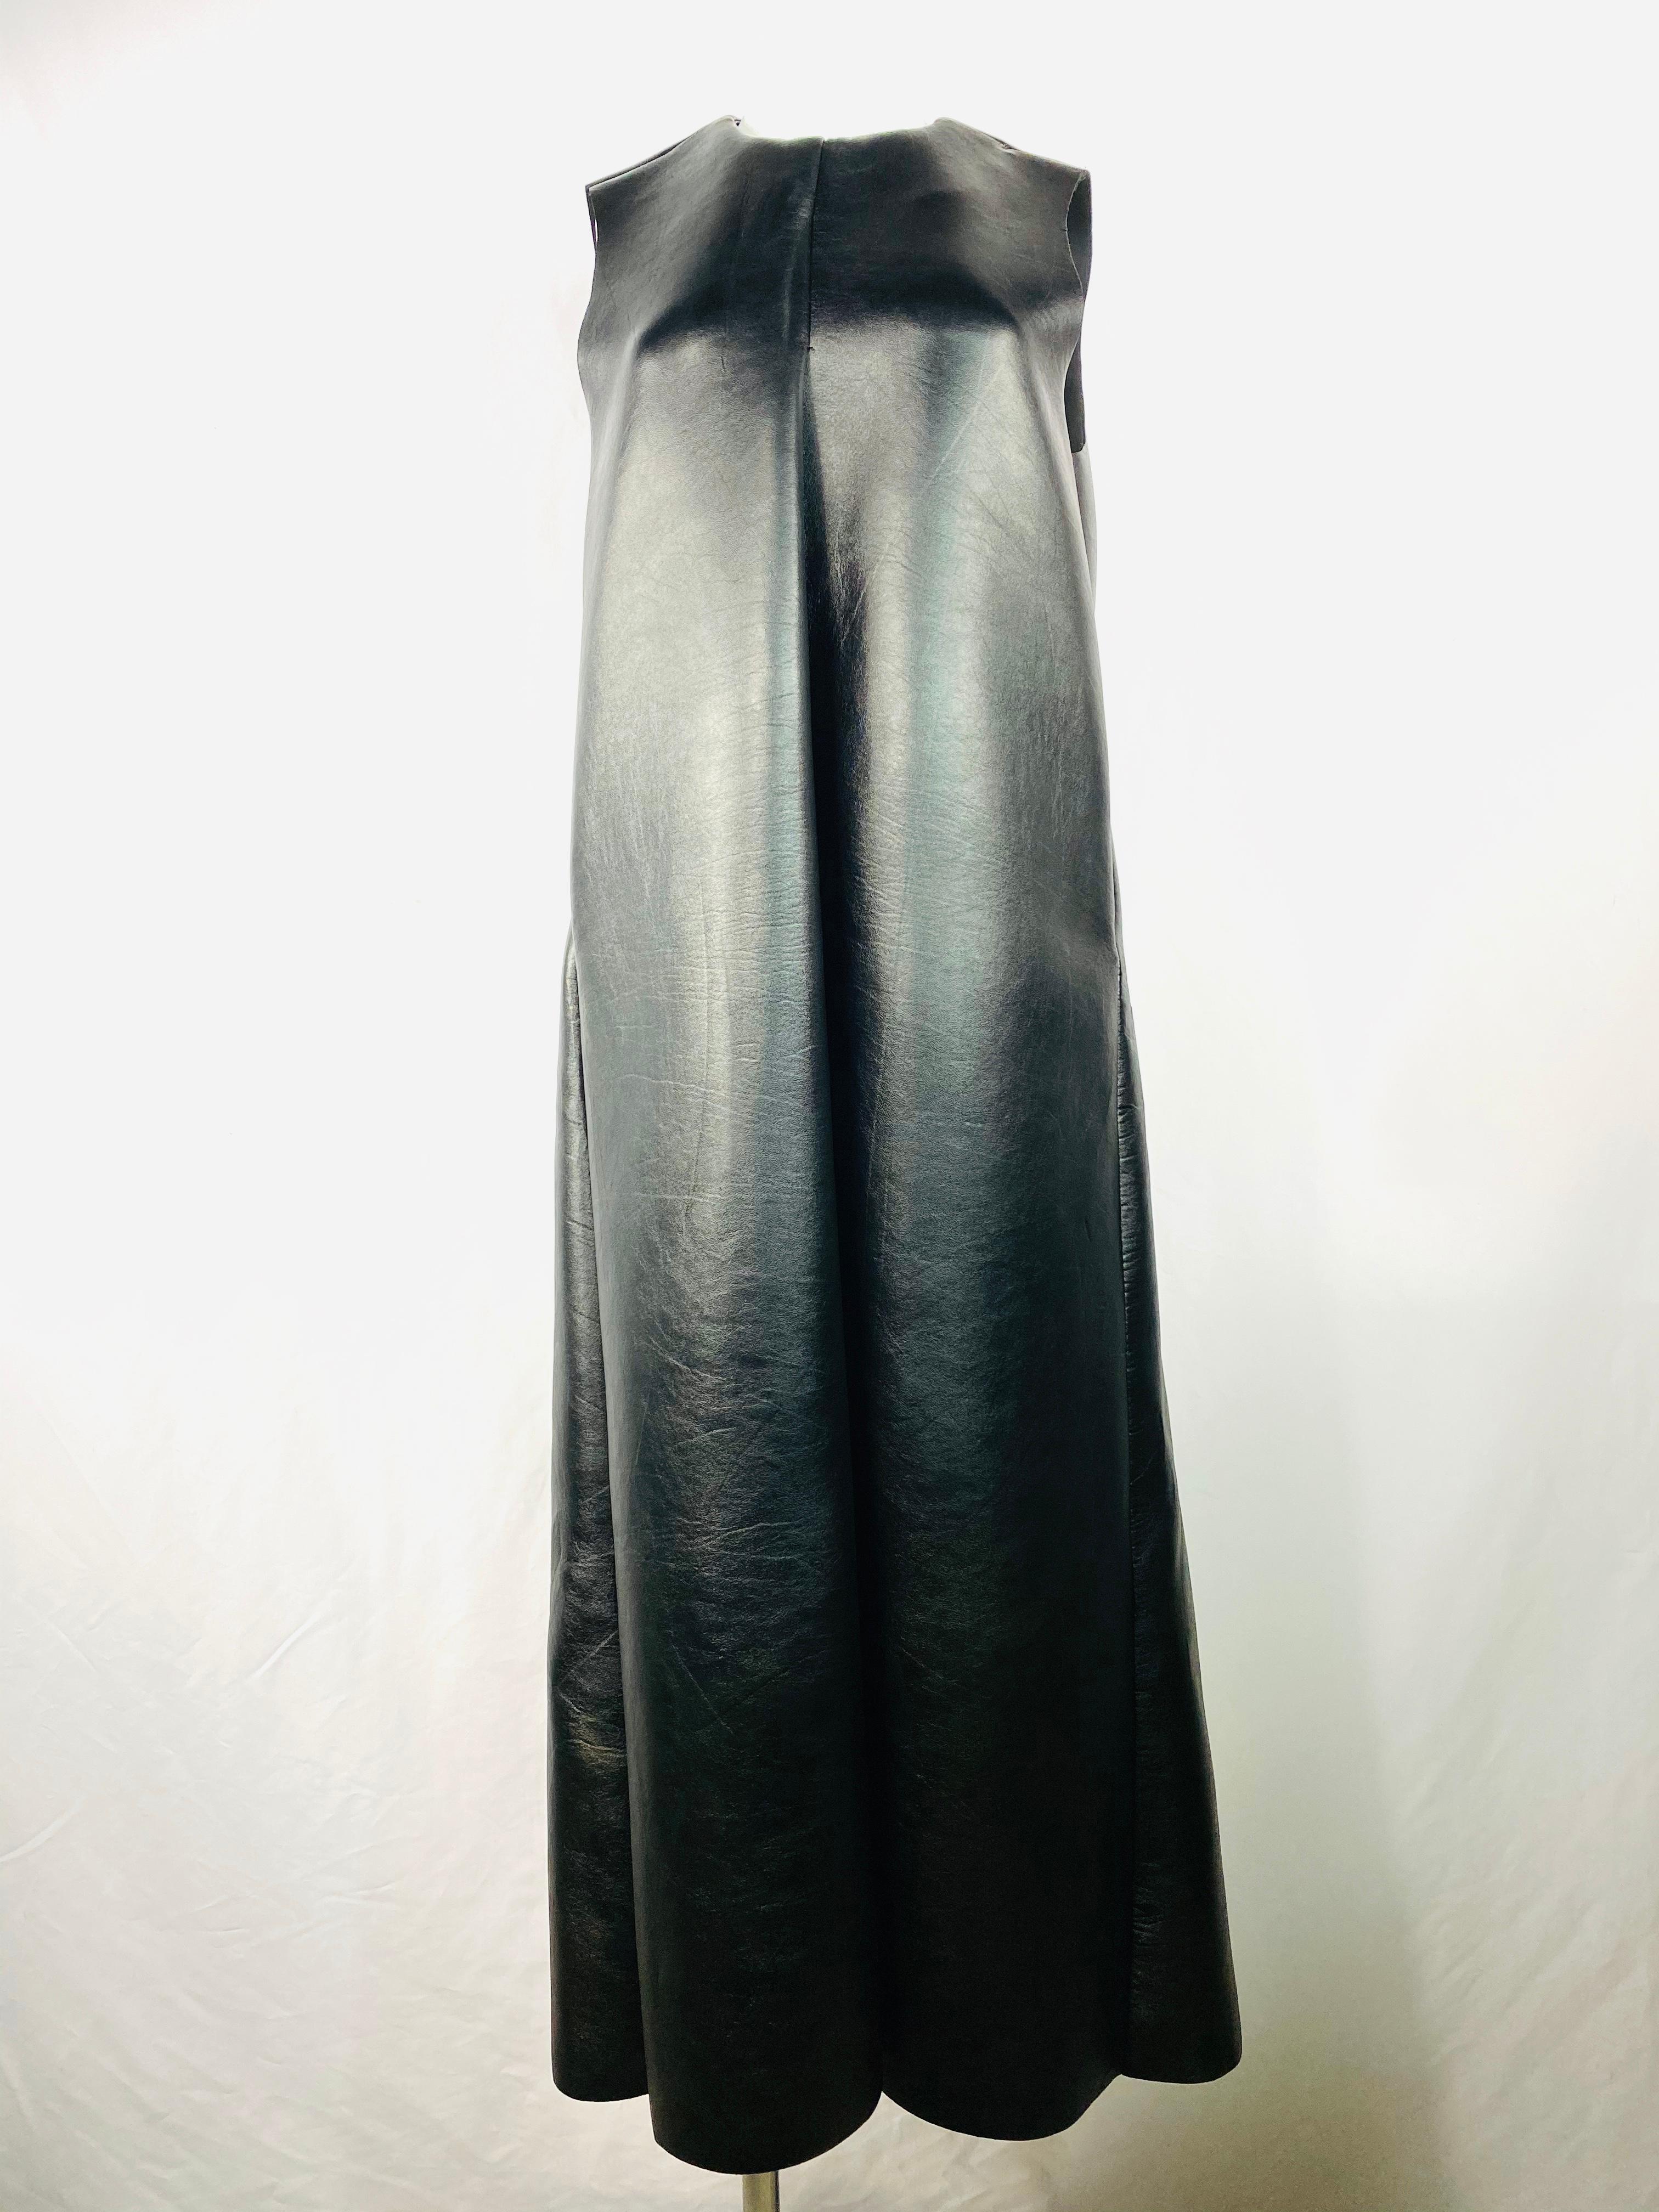 Product details:

Featuring flack faux leather, sleeveless, crew neck, pocket on each side, rear zip closure, maxi dress. 
Size M.
Made in USA.